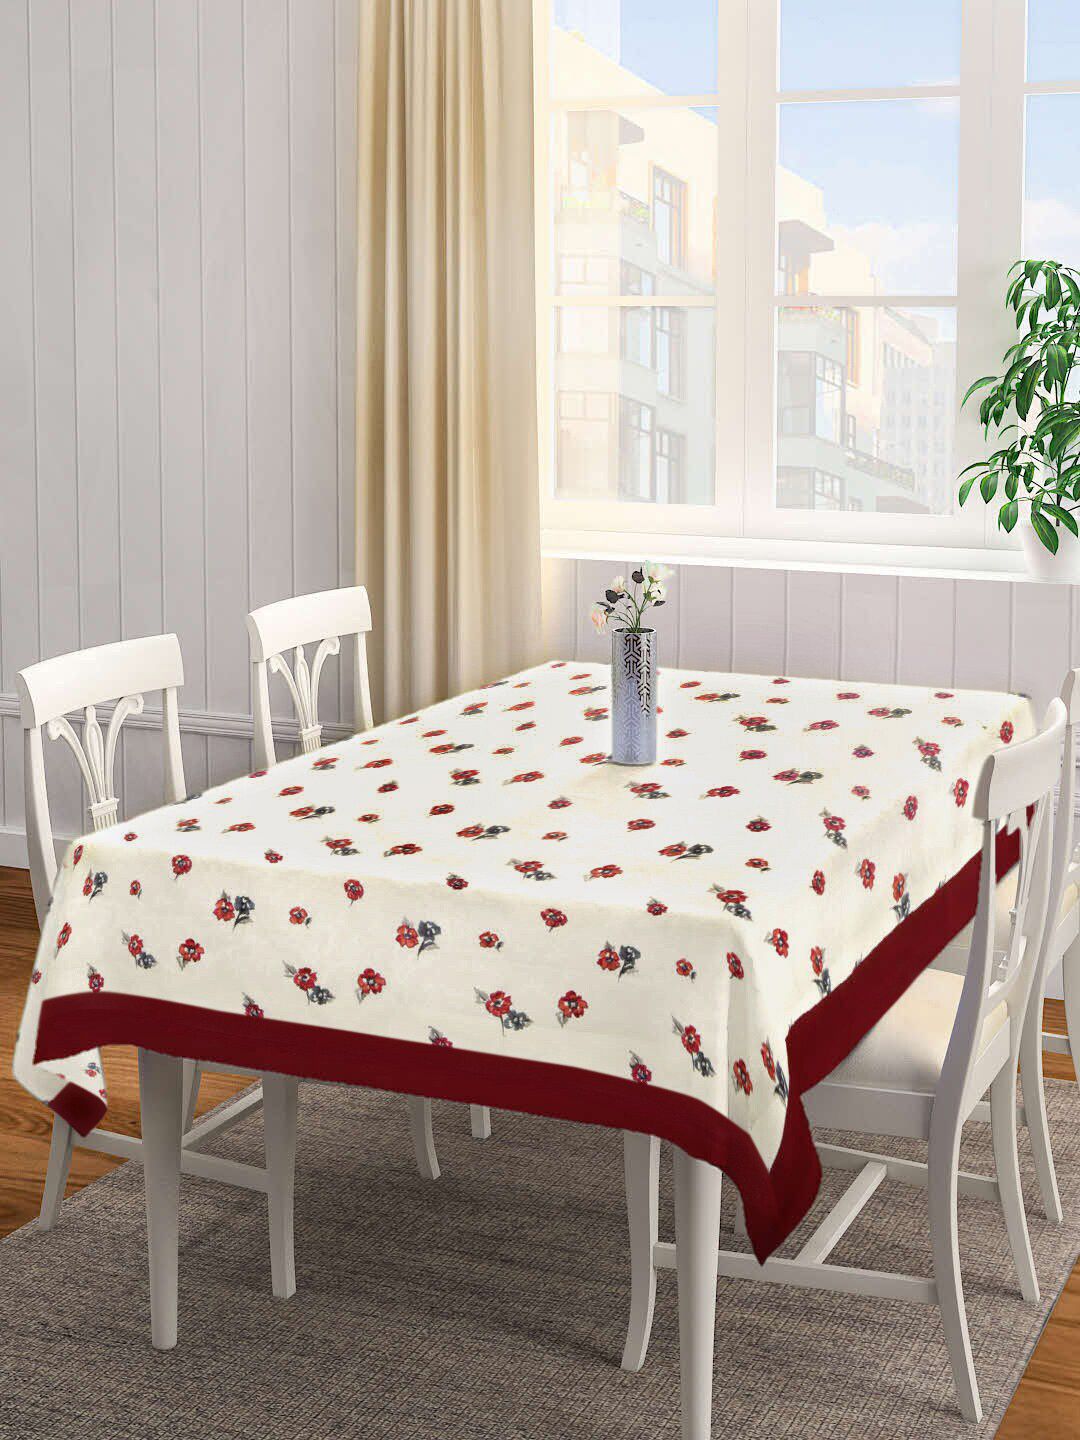 SHADES of LIFE Cream & Maroon Floral Rectangular 6 Seater Cotton Table Cover Price in India